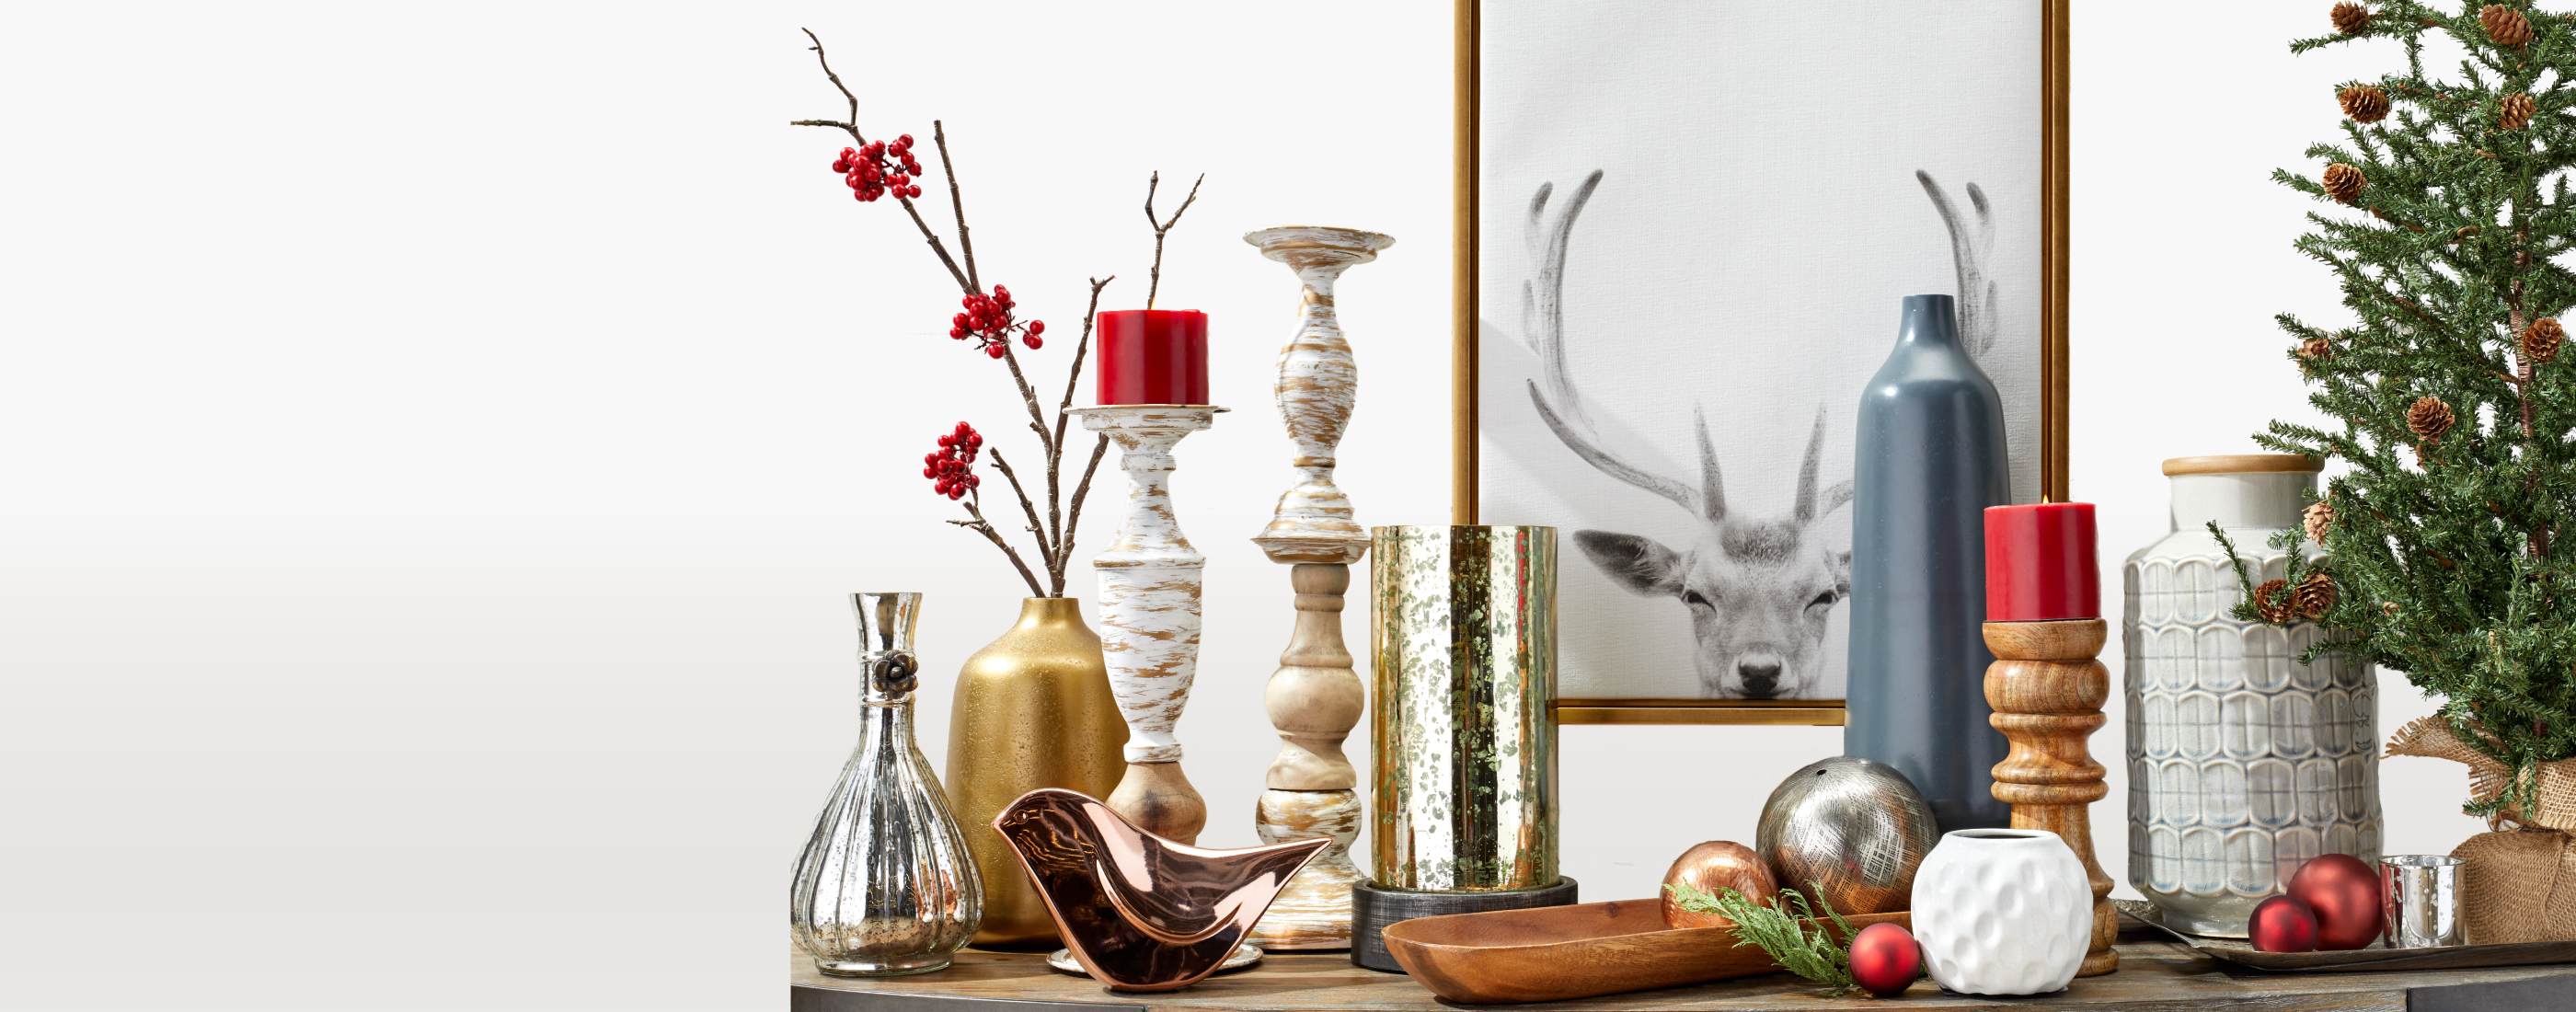 holiday candles, vases, and other decor on top of a table available online at Overstock